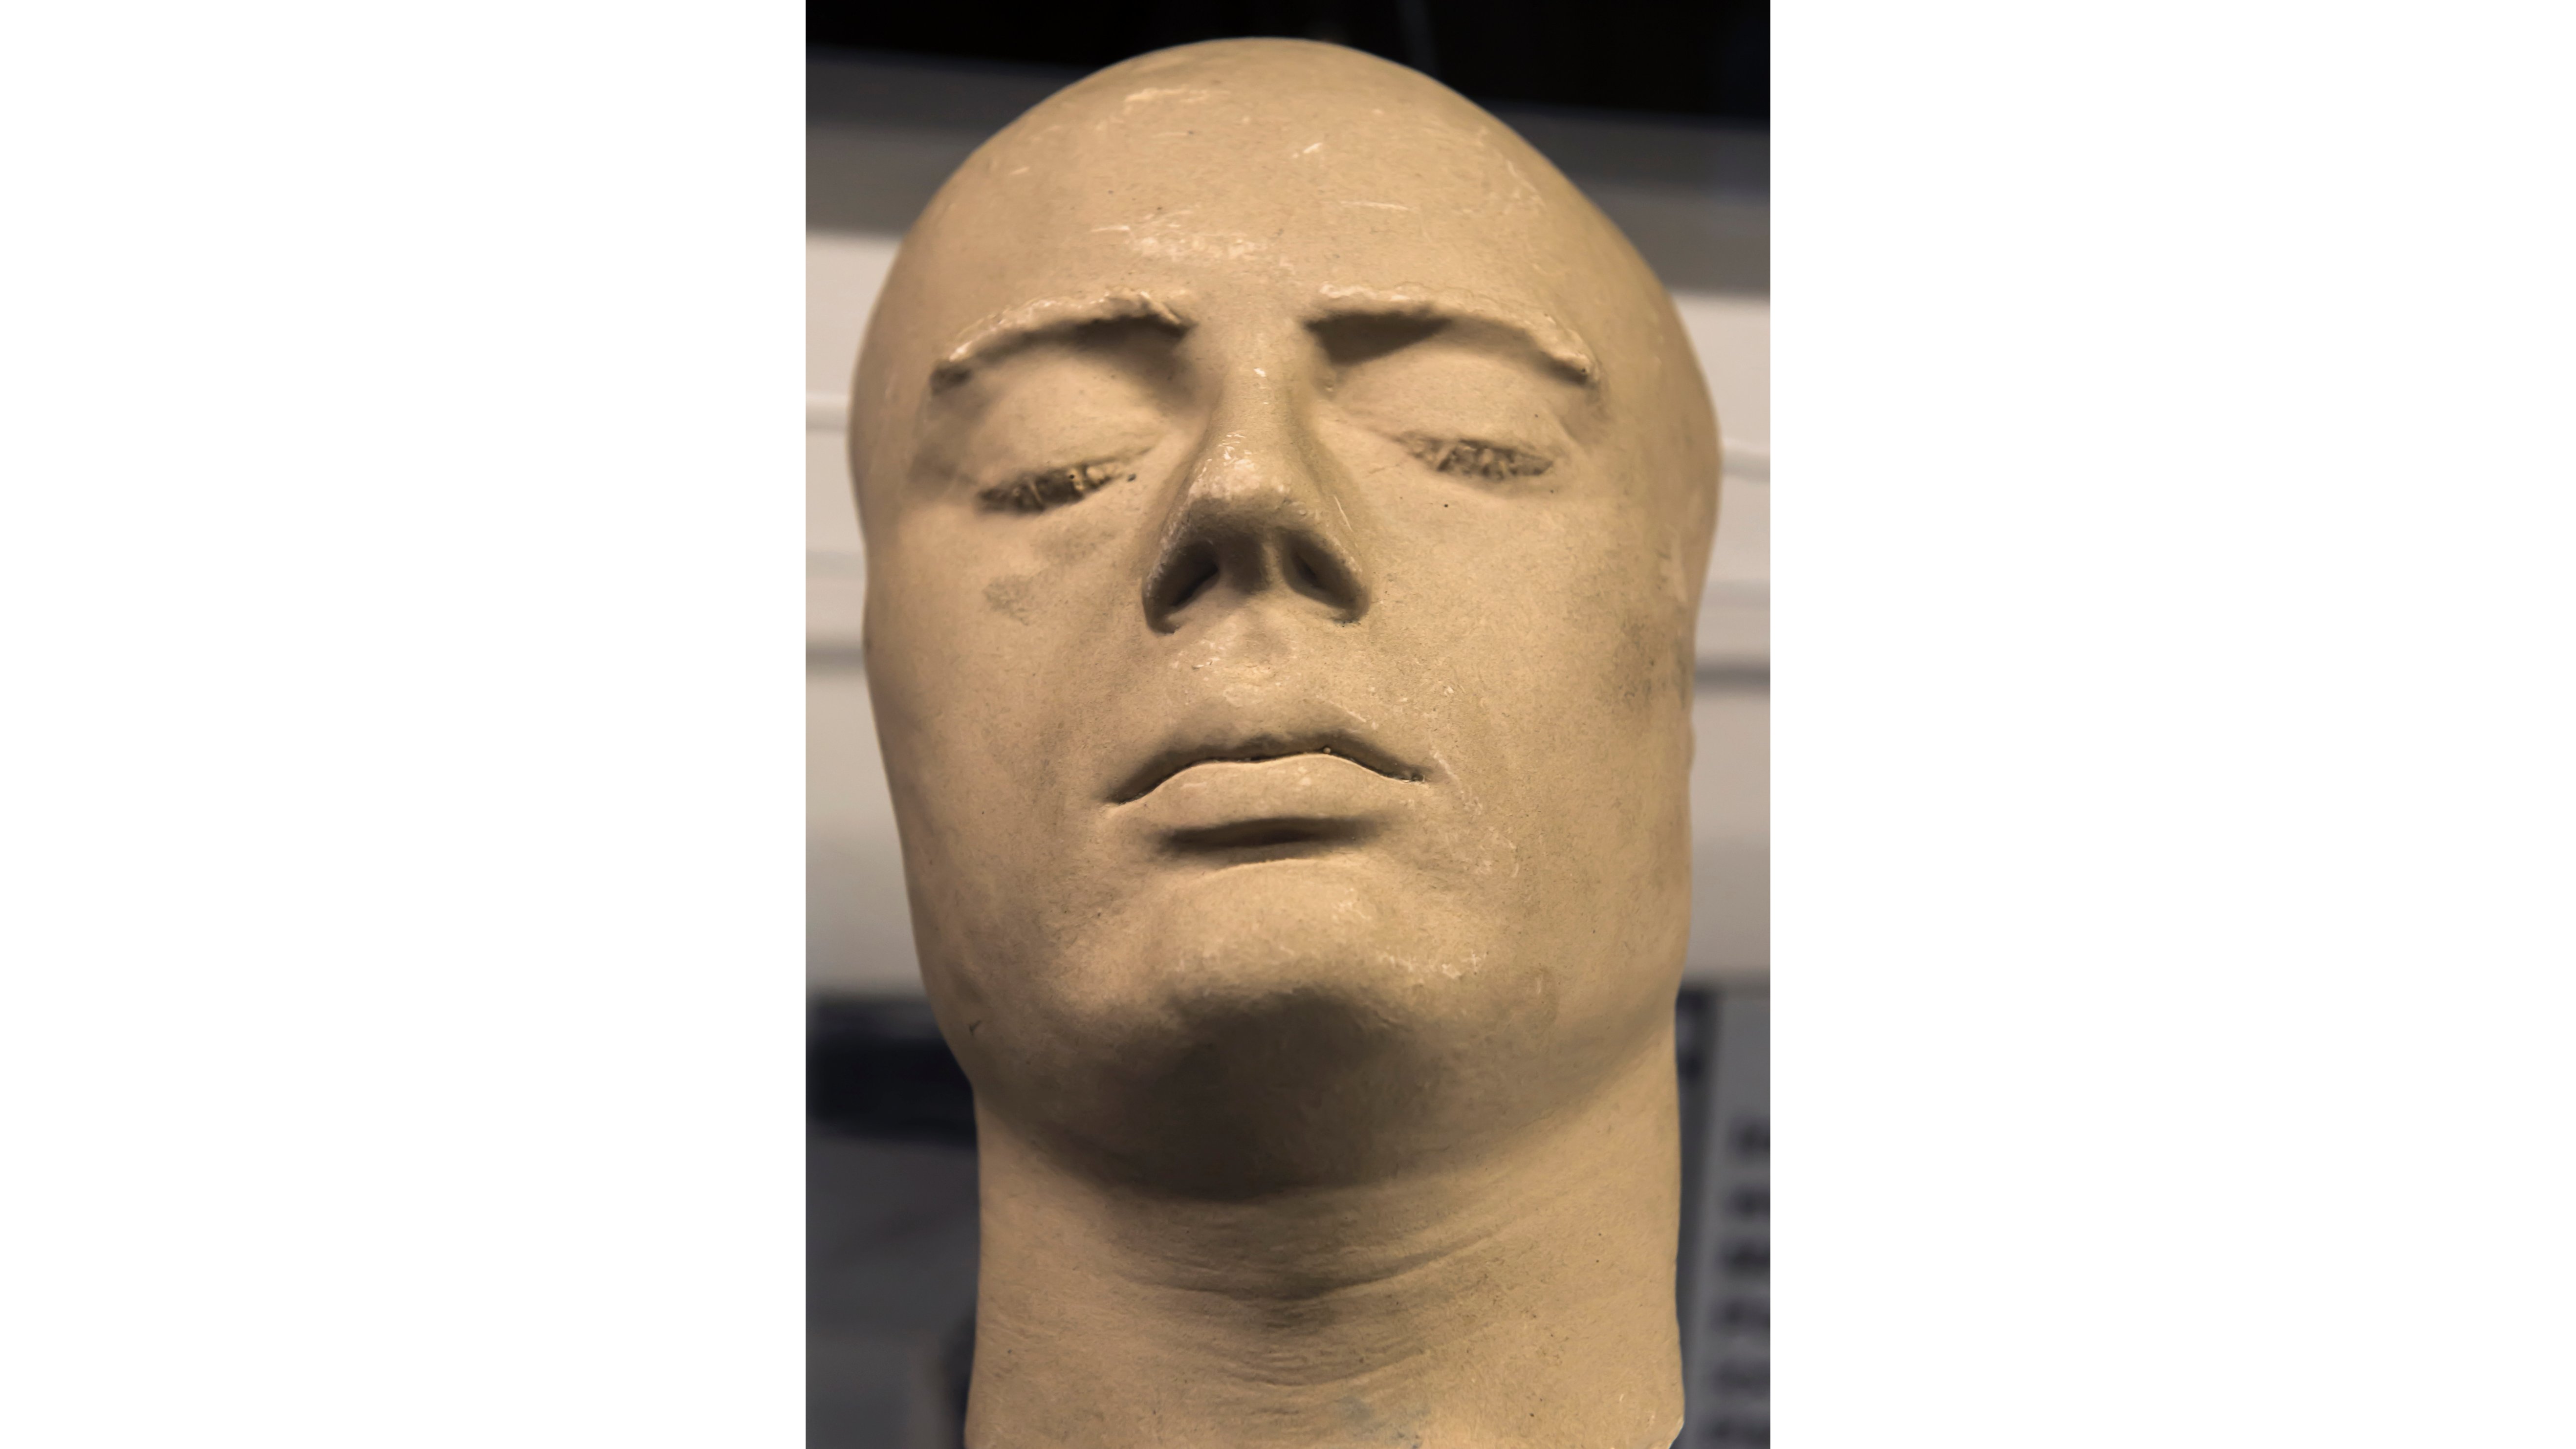 death masks of famous people history channel